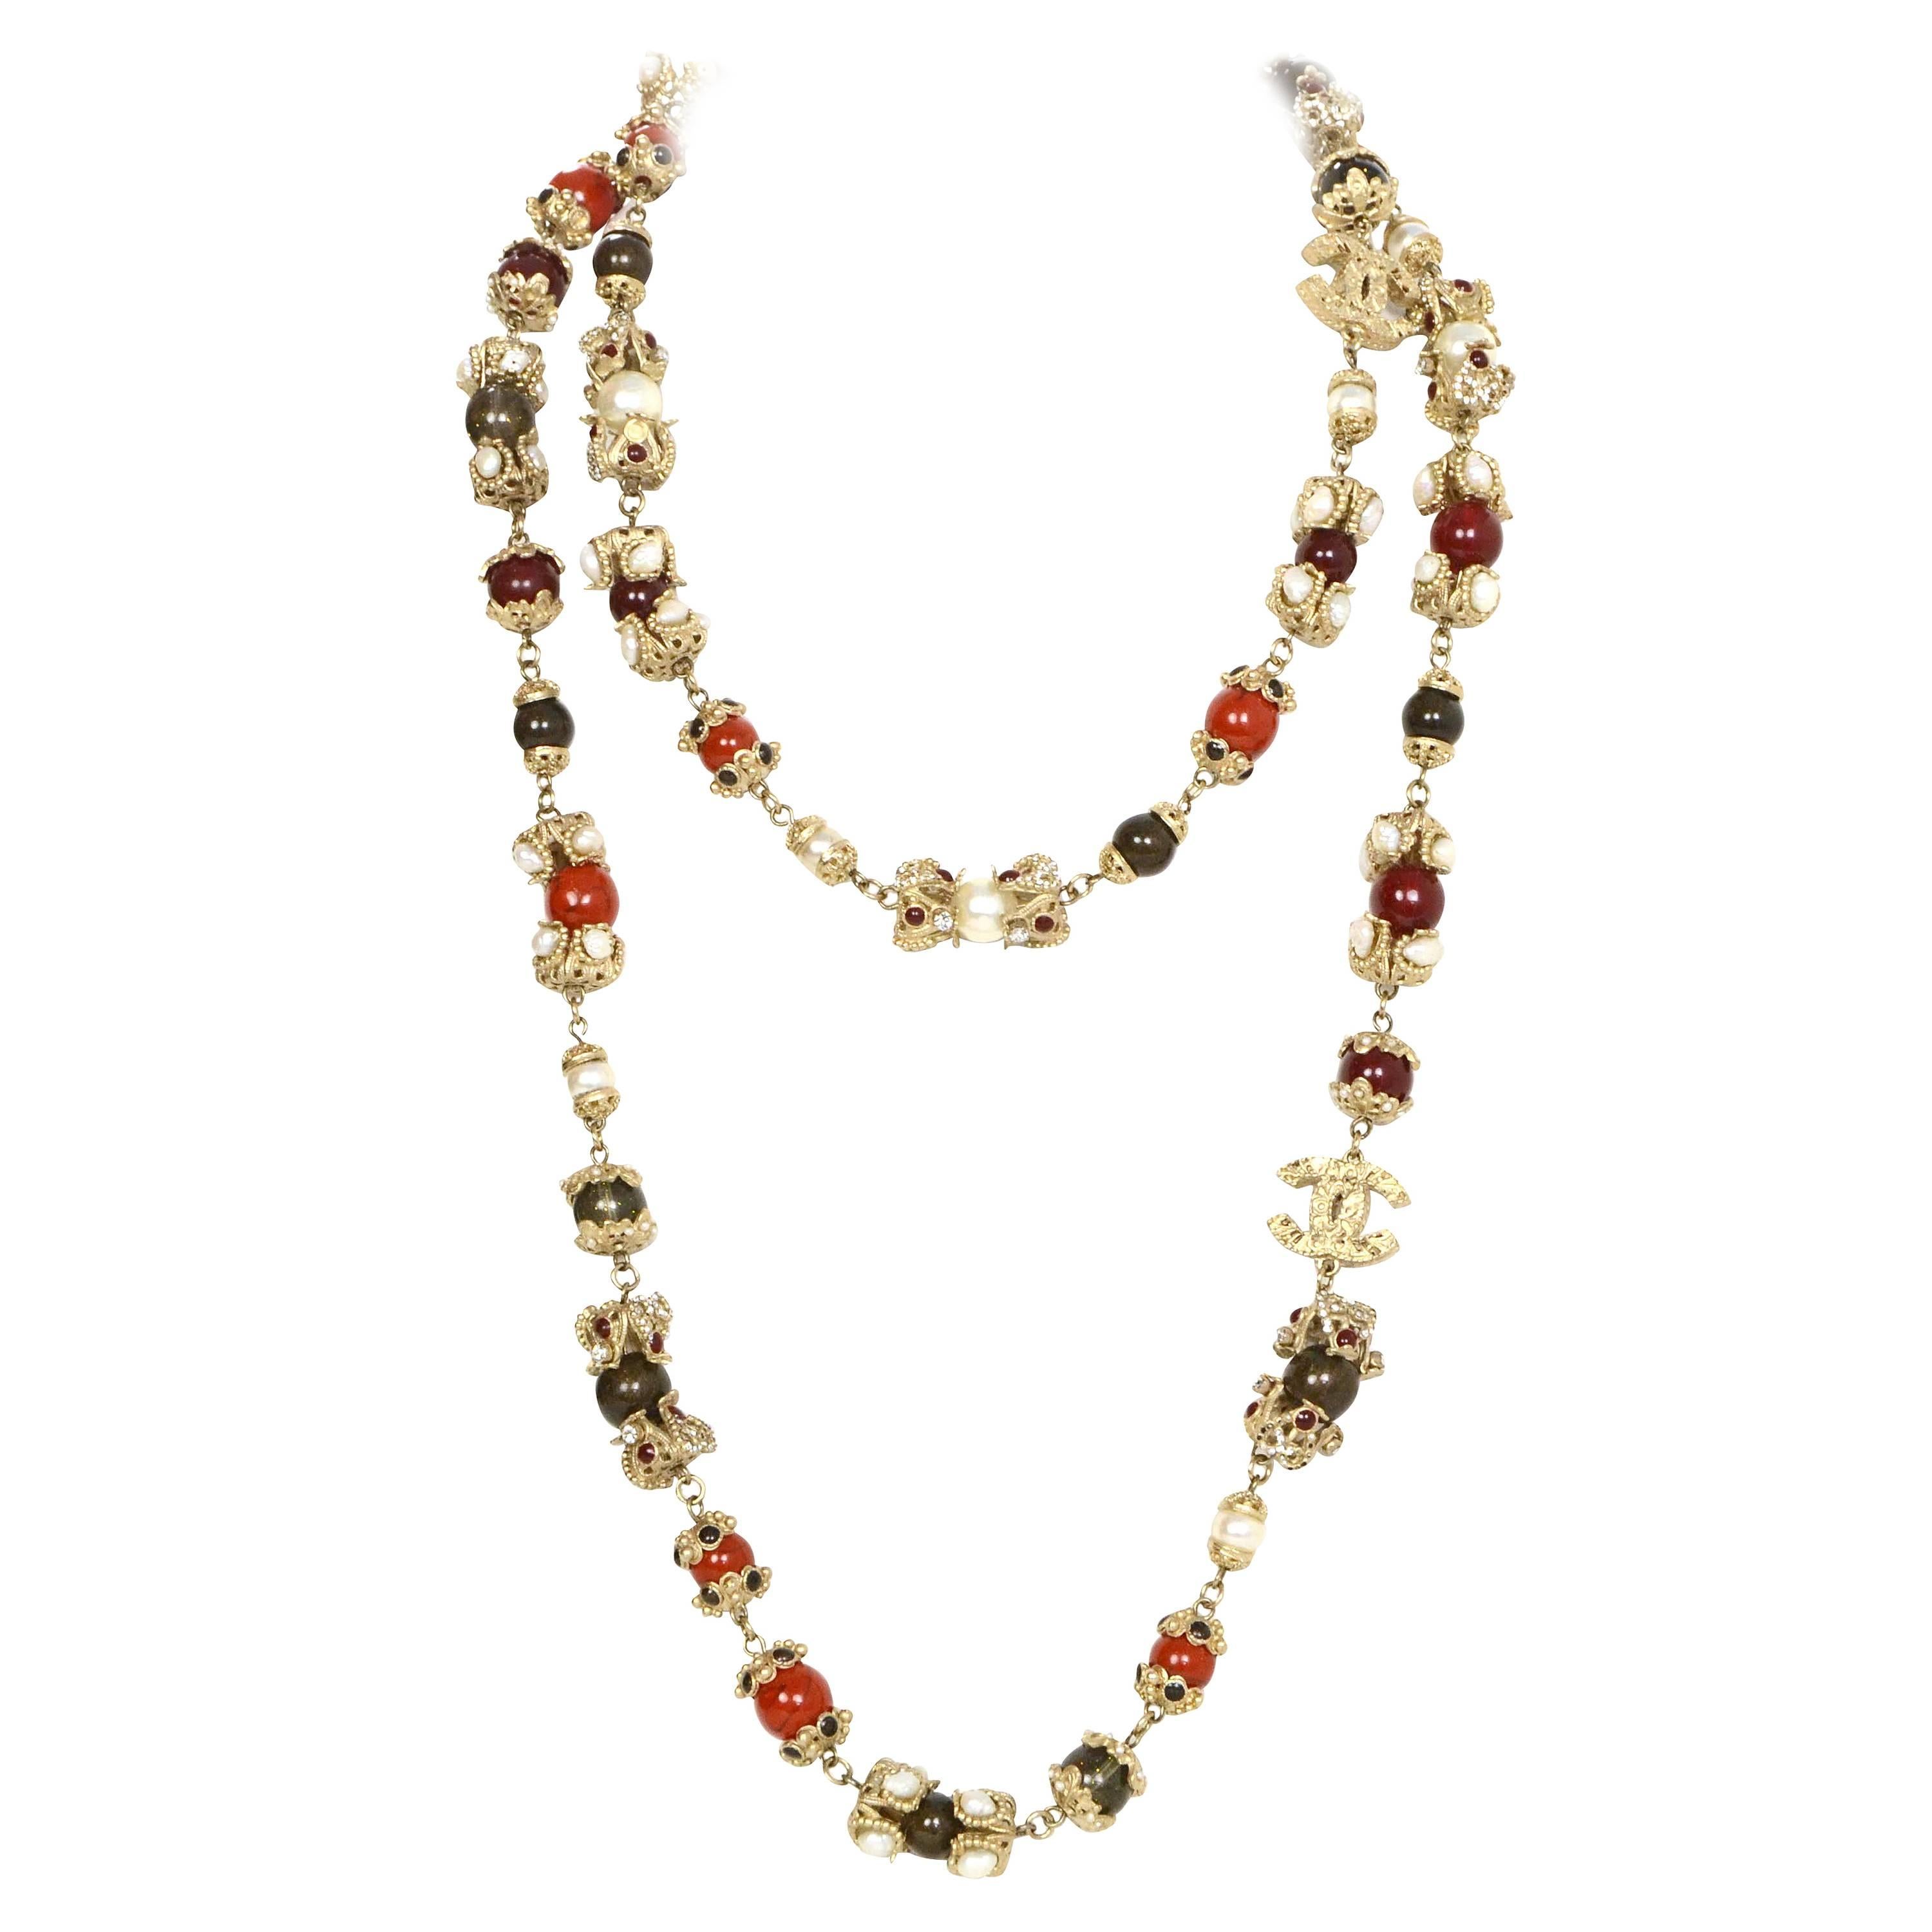 Chanel Paris/Moscow Runway Bead & Pearl Necklace